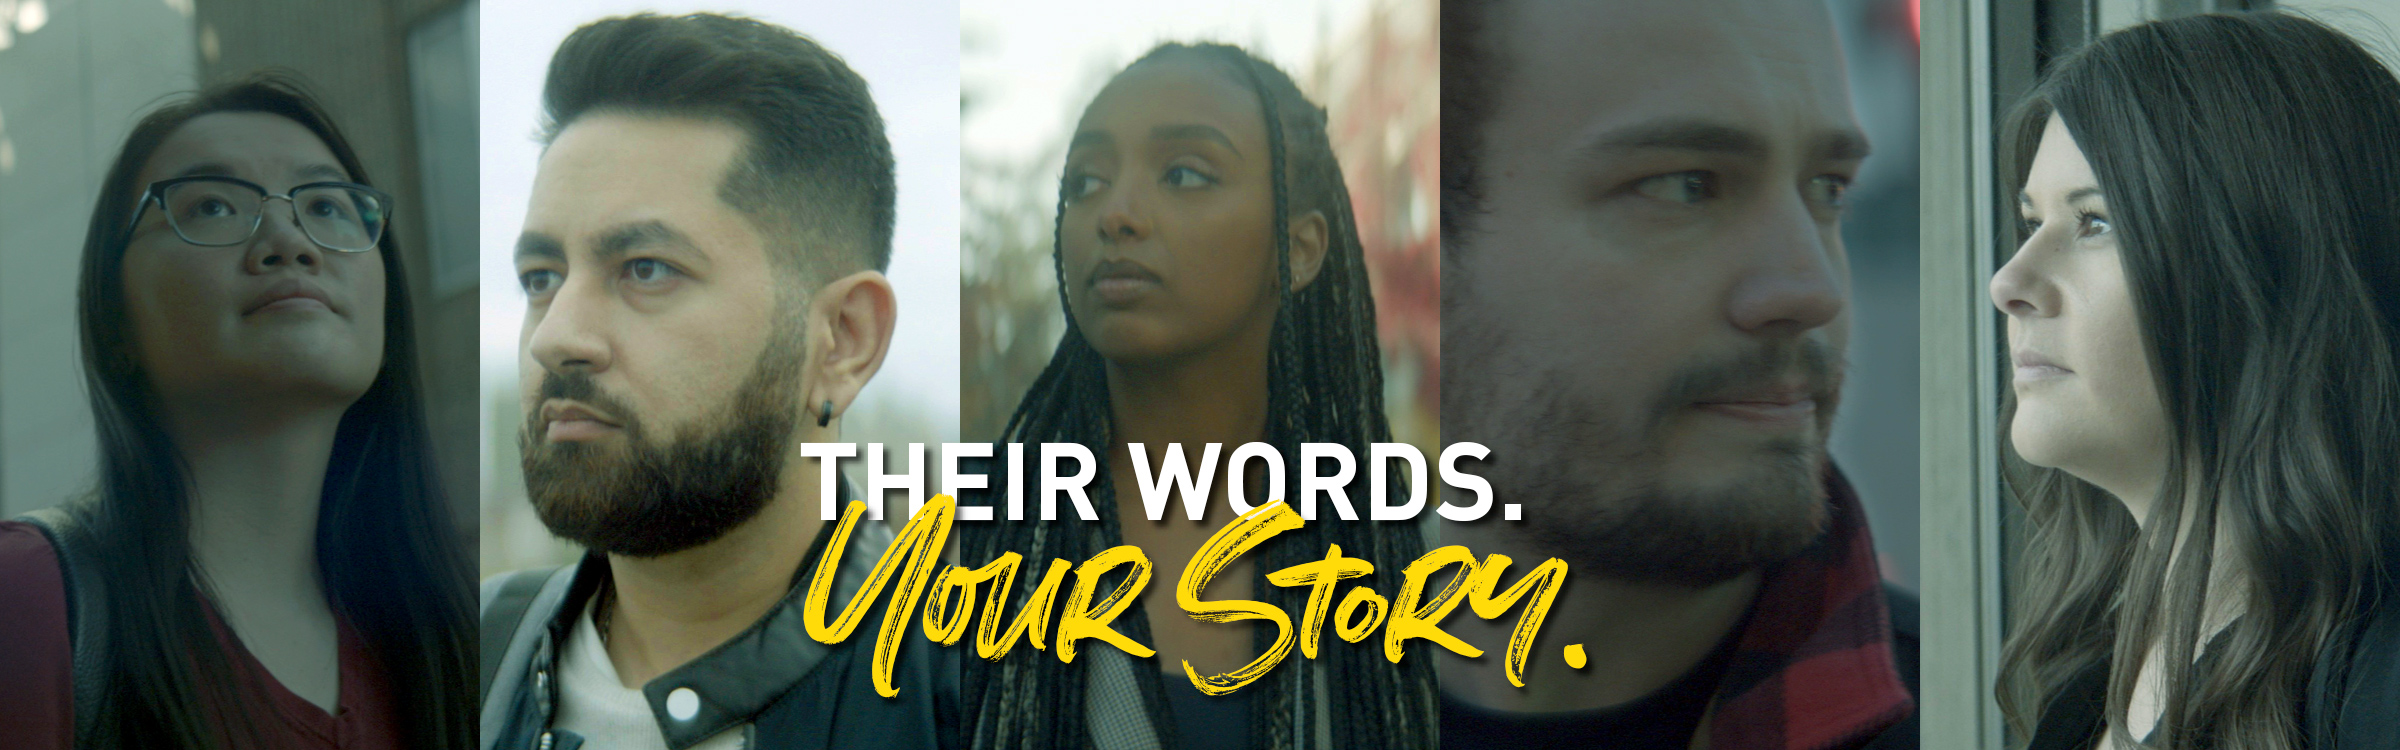 Their words Your story